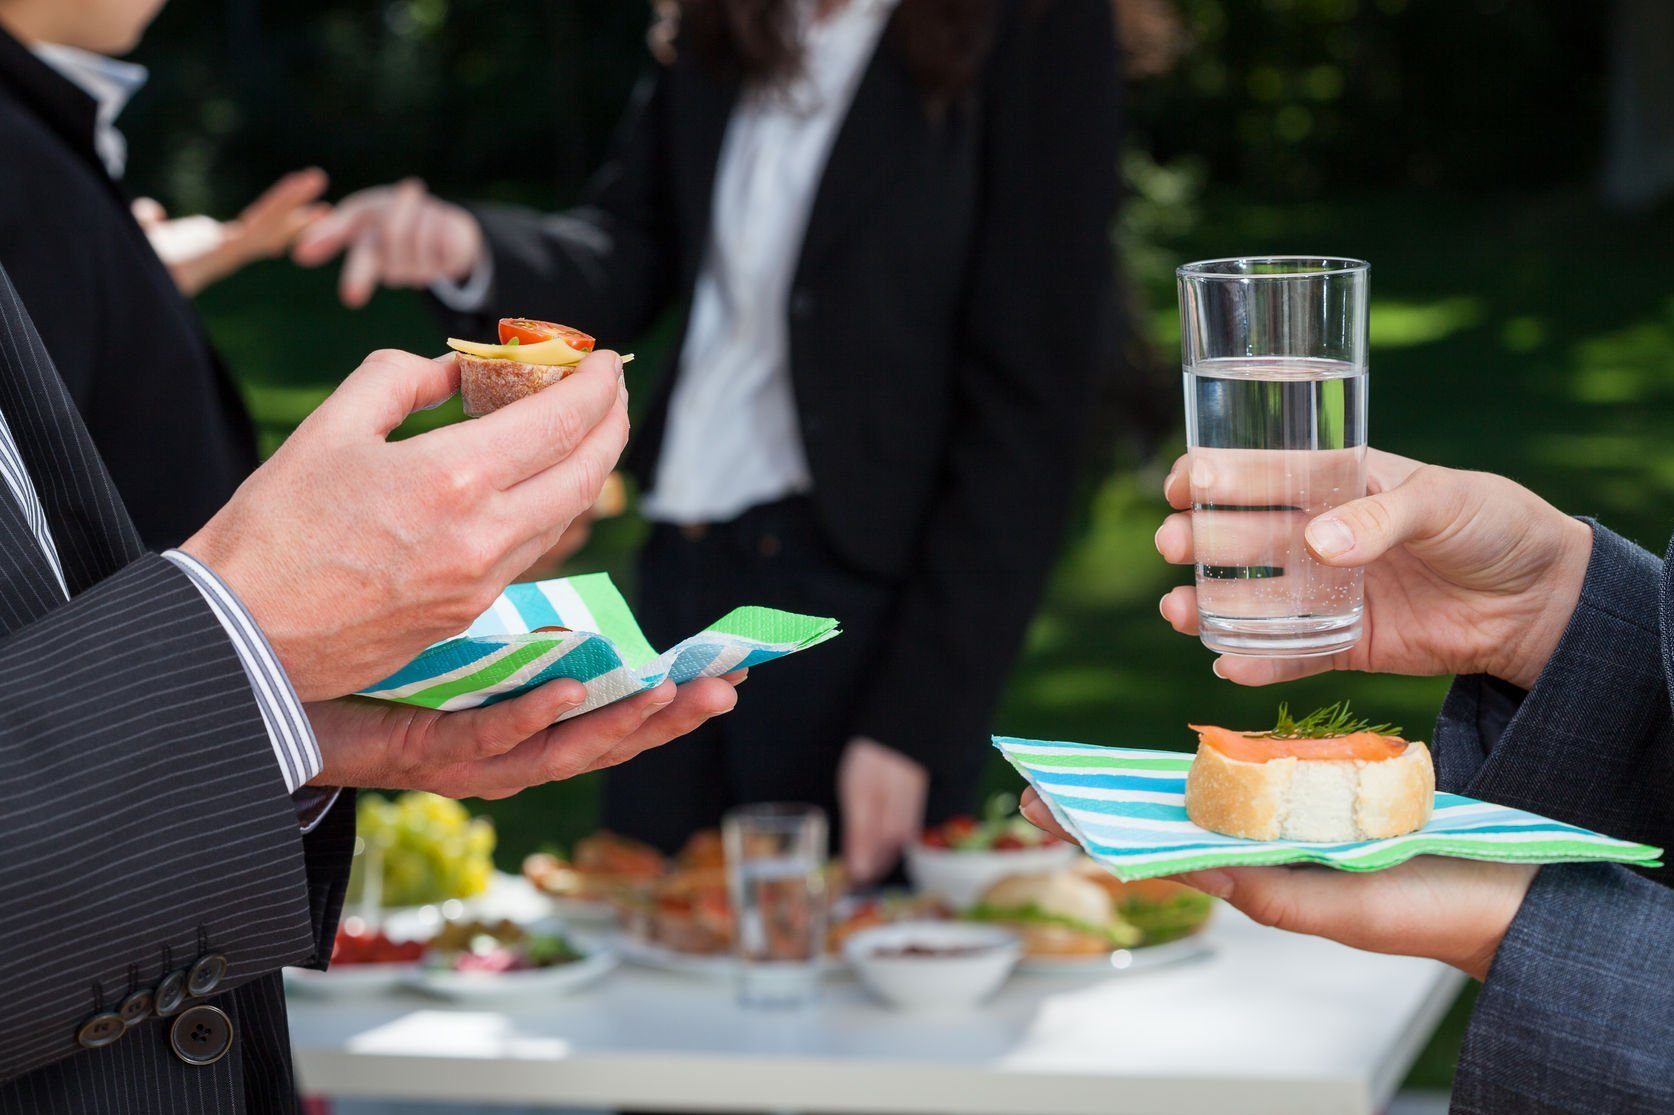 Corporate events and gatherings